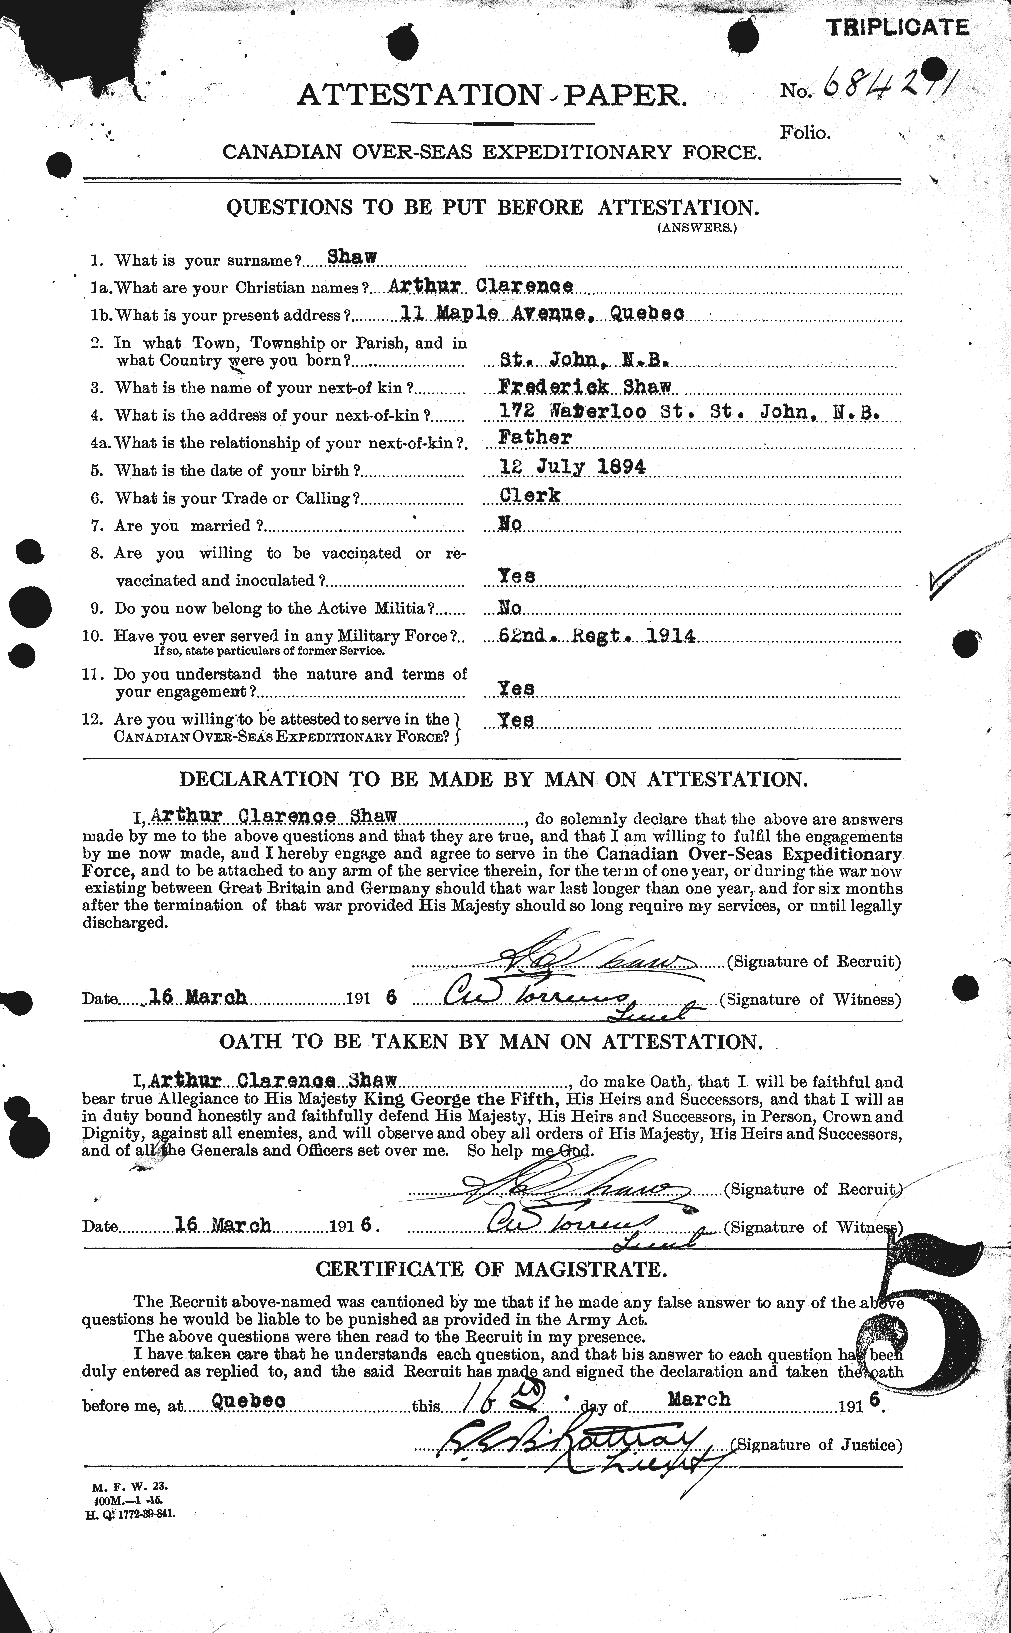 Personnel Records of the First World War - CEF 093239a